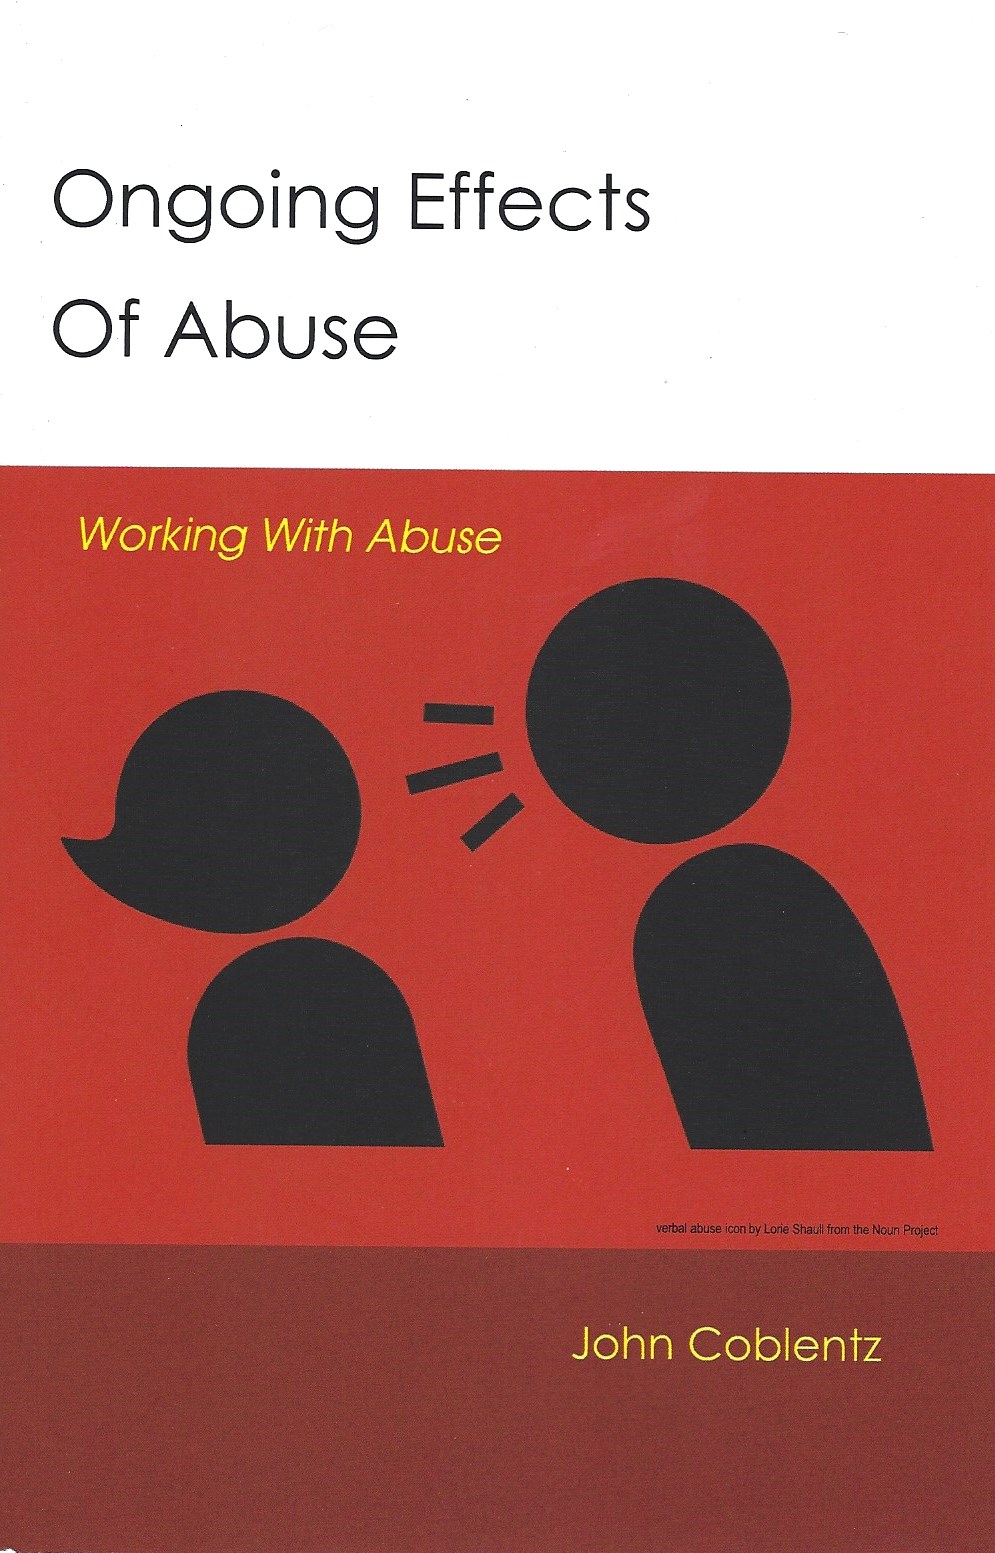 ONGOING EFFECTS OF ABUSE John Coblentz